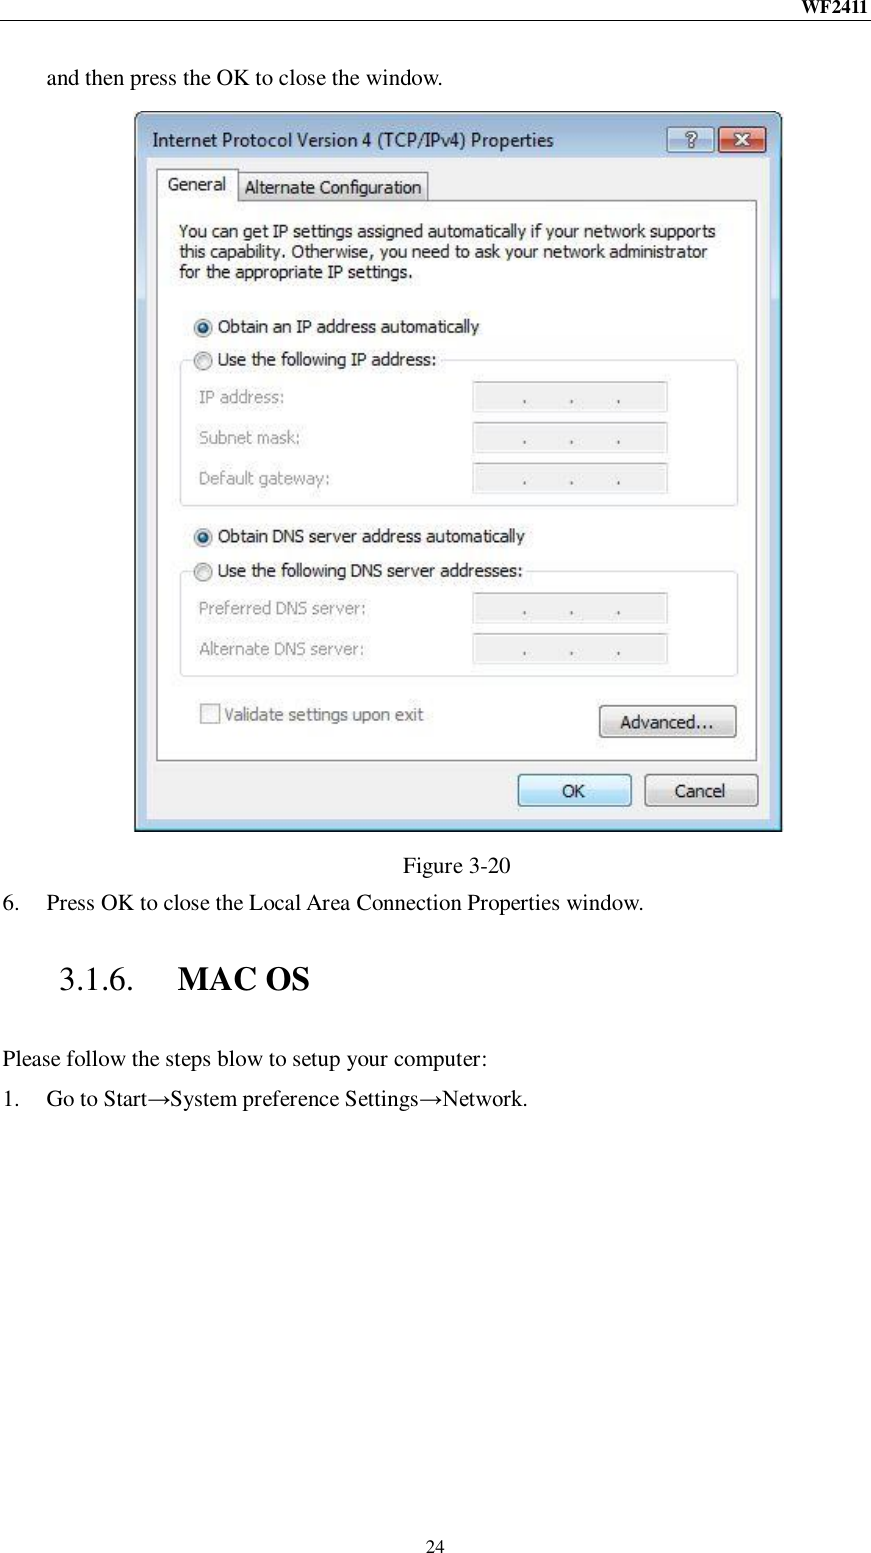 WF2411  24 and then press the OK to close the window.  Figure 3-20 6. Press OK to close the Local Area Connection Properties window. 3.1.6. MAC OS Please follow the steps blow to setup your computer: 1. Go to Start→System preference Settings→Network. 